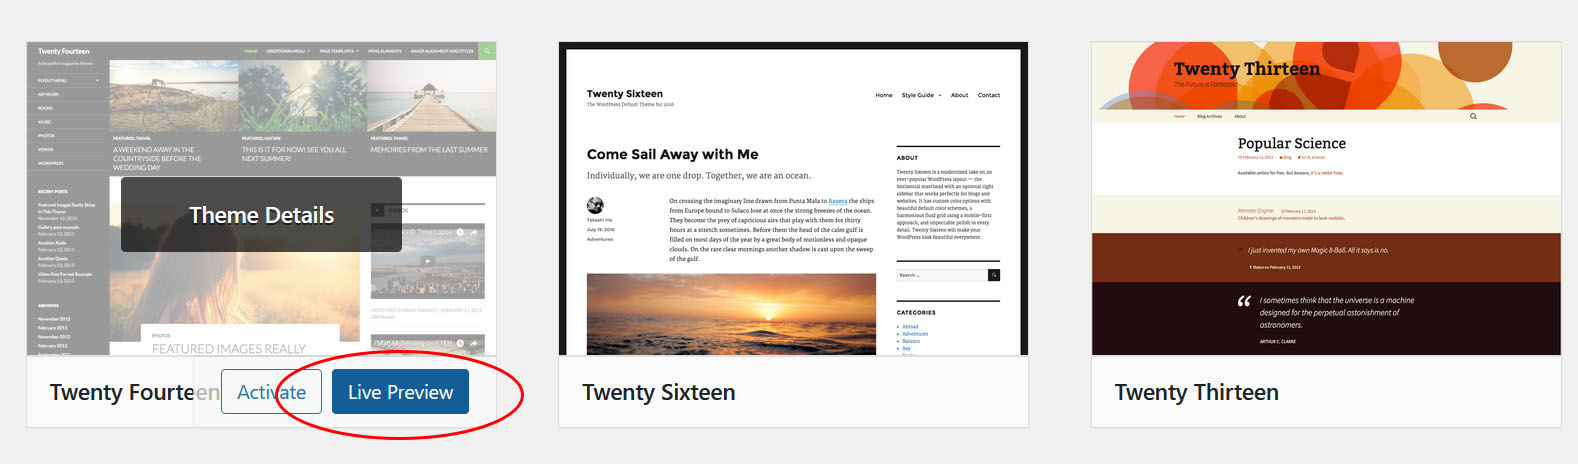 wordpress theme live preview button highlighted